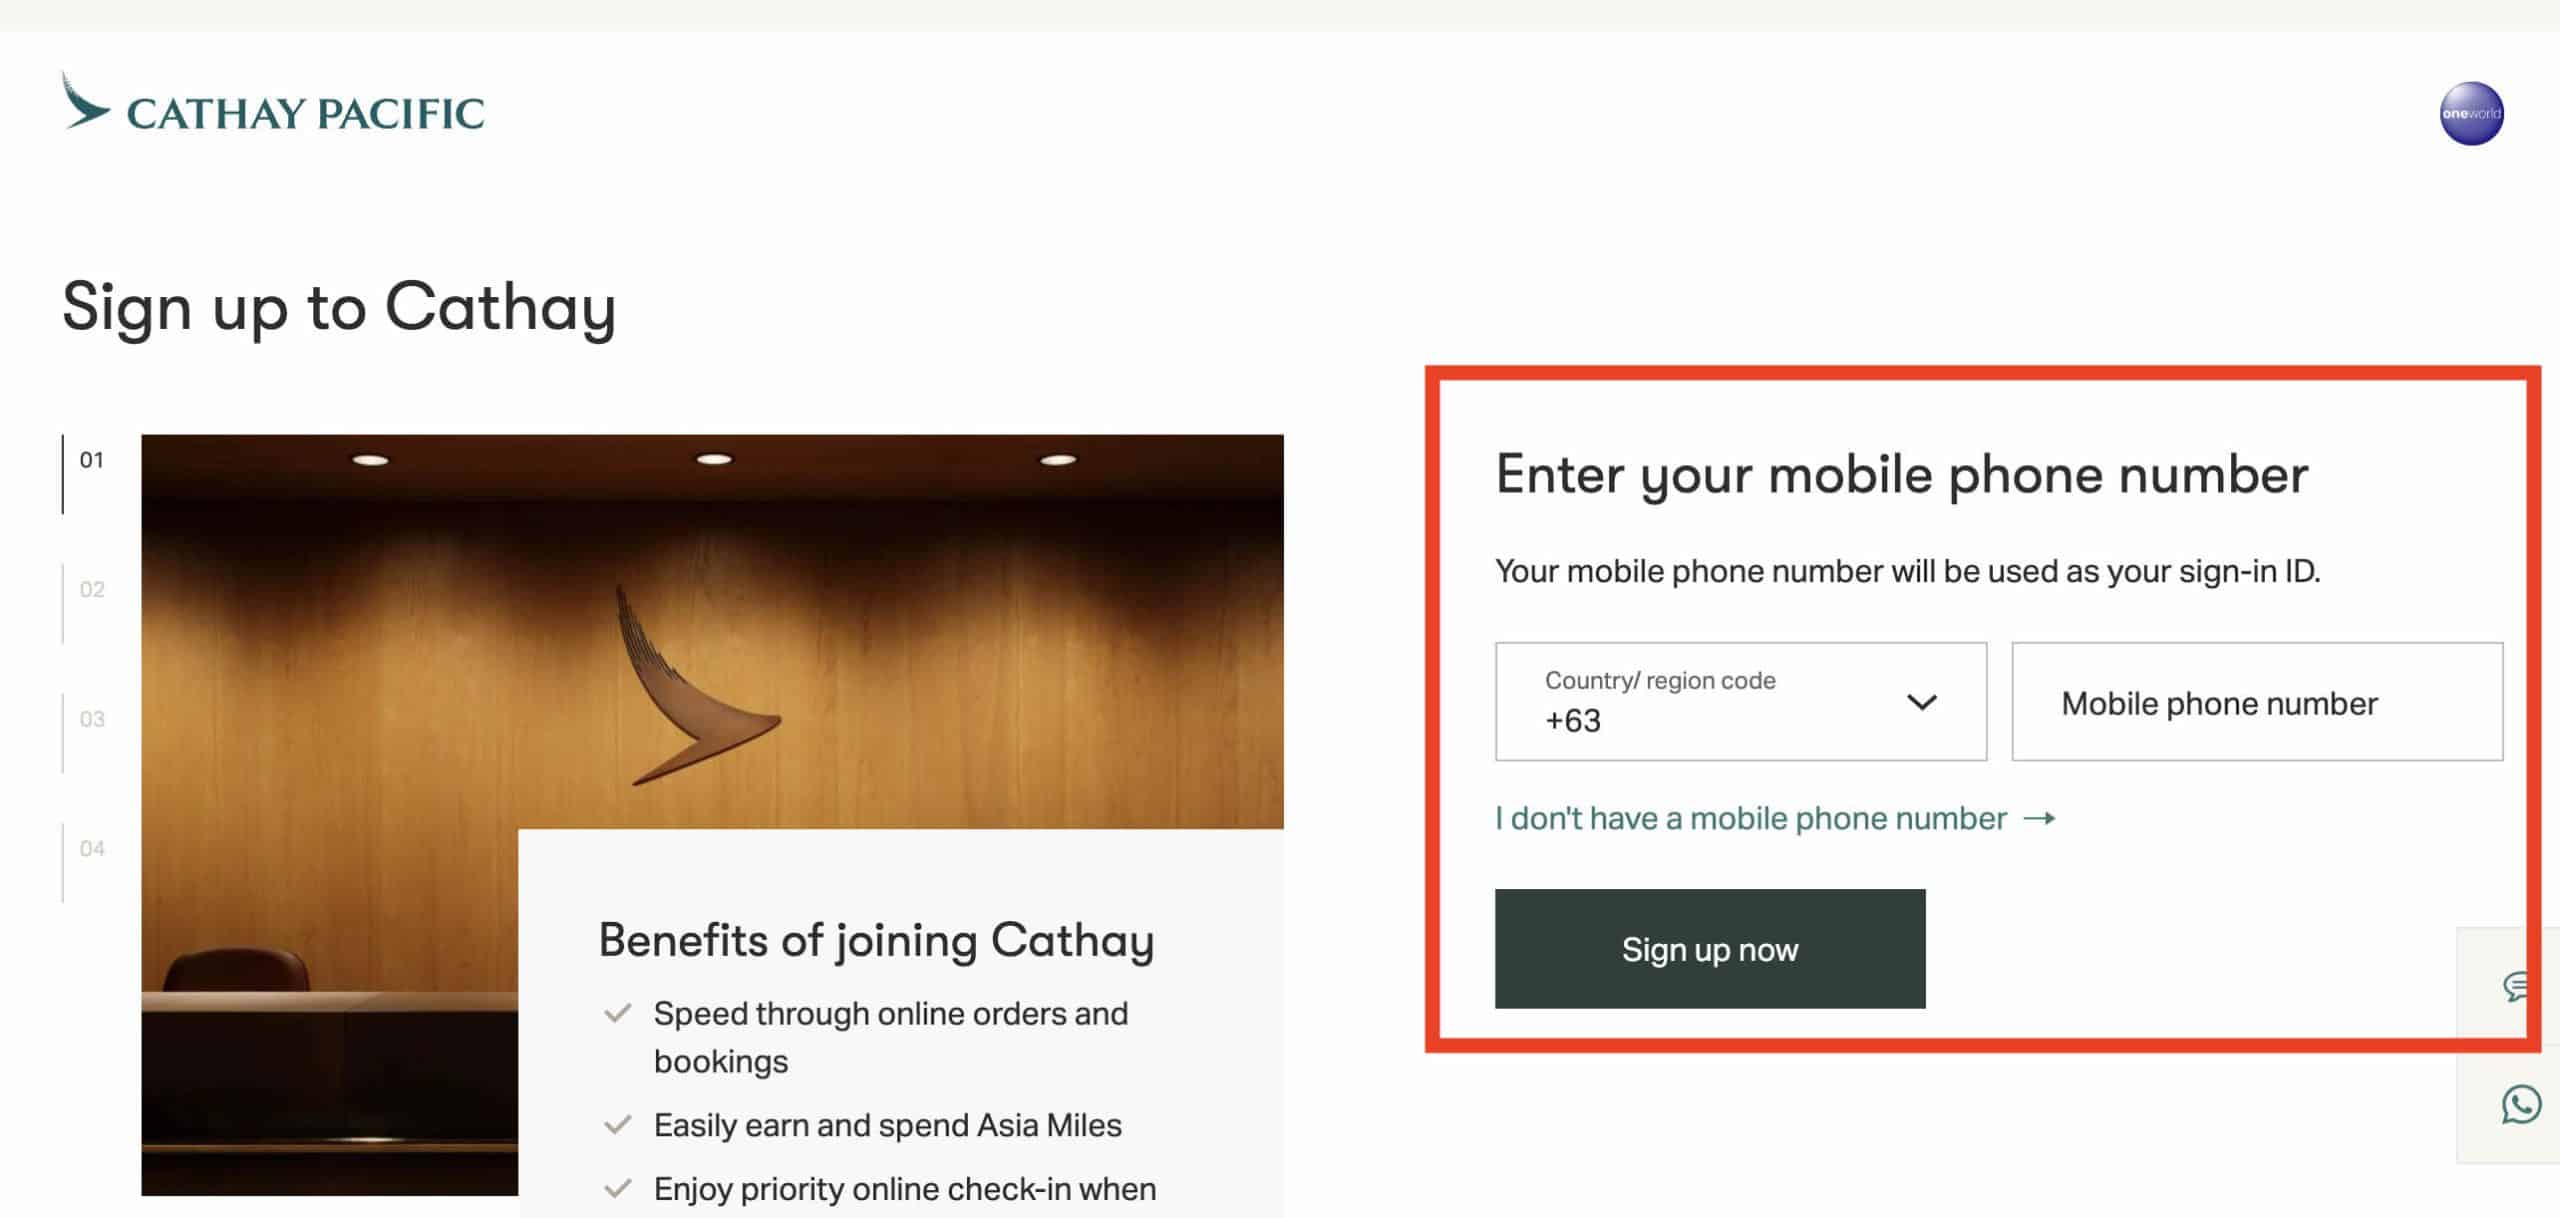 Cathay Pacific subscription page